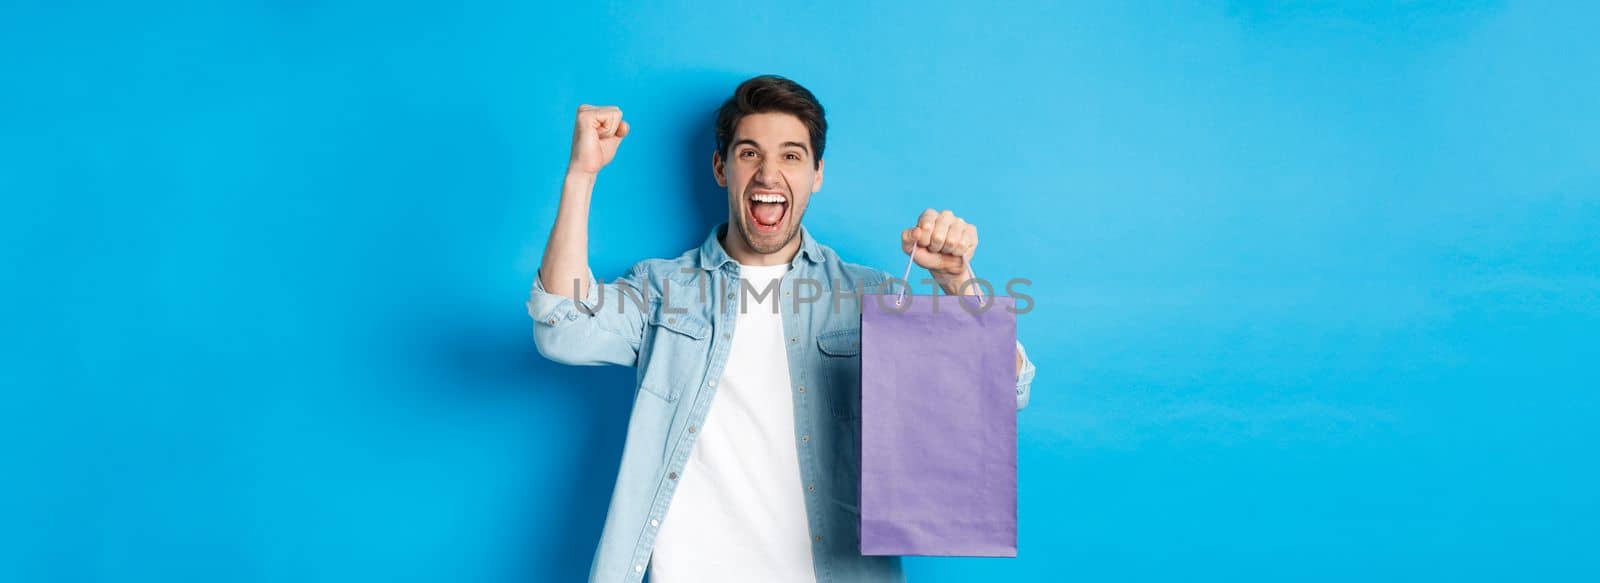 Concept of shopping, holidays and lifestyle. Cheerful young man celebrating, holding paper bag and making fist pump like winner, standing over blue background by Benzoix